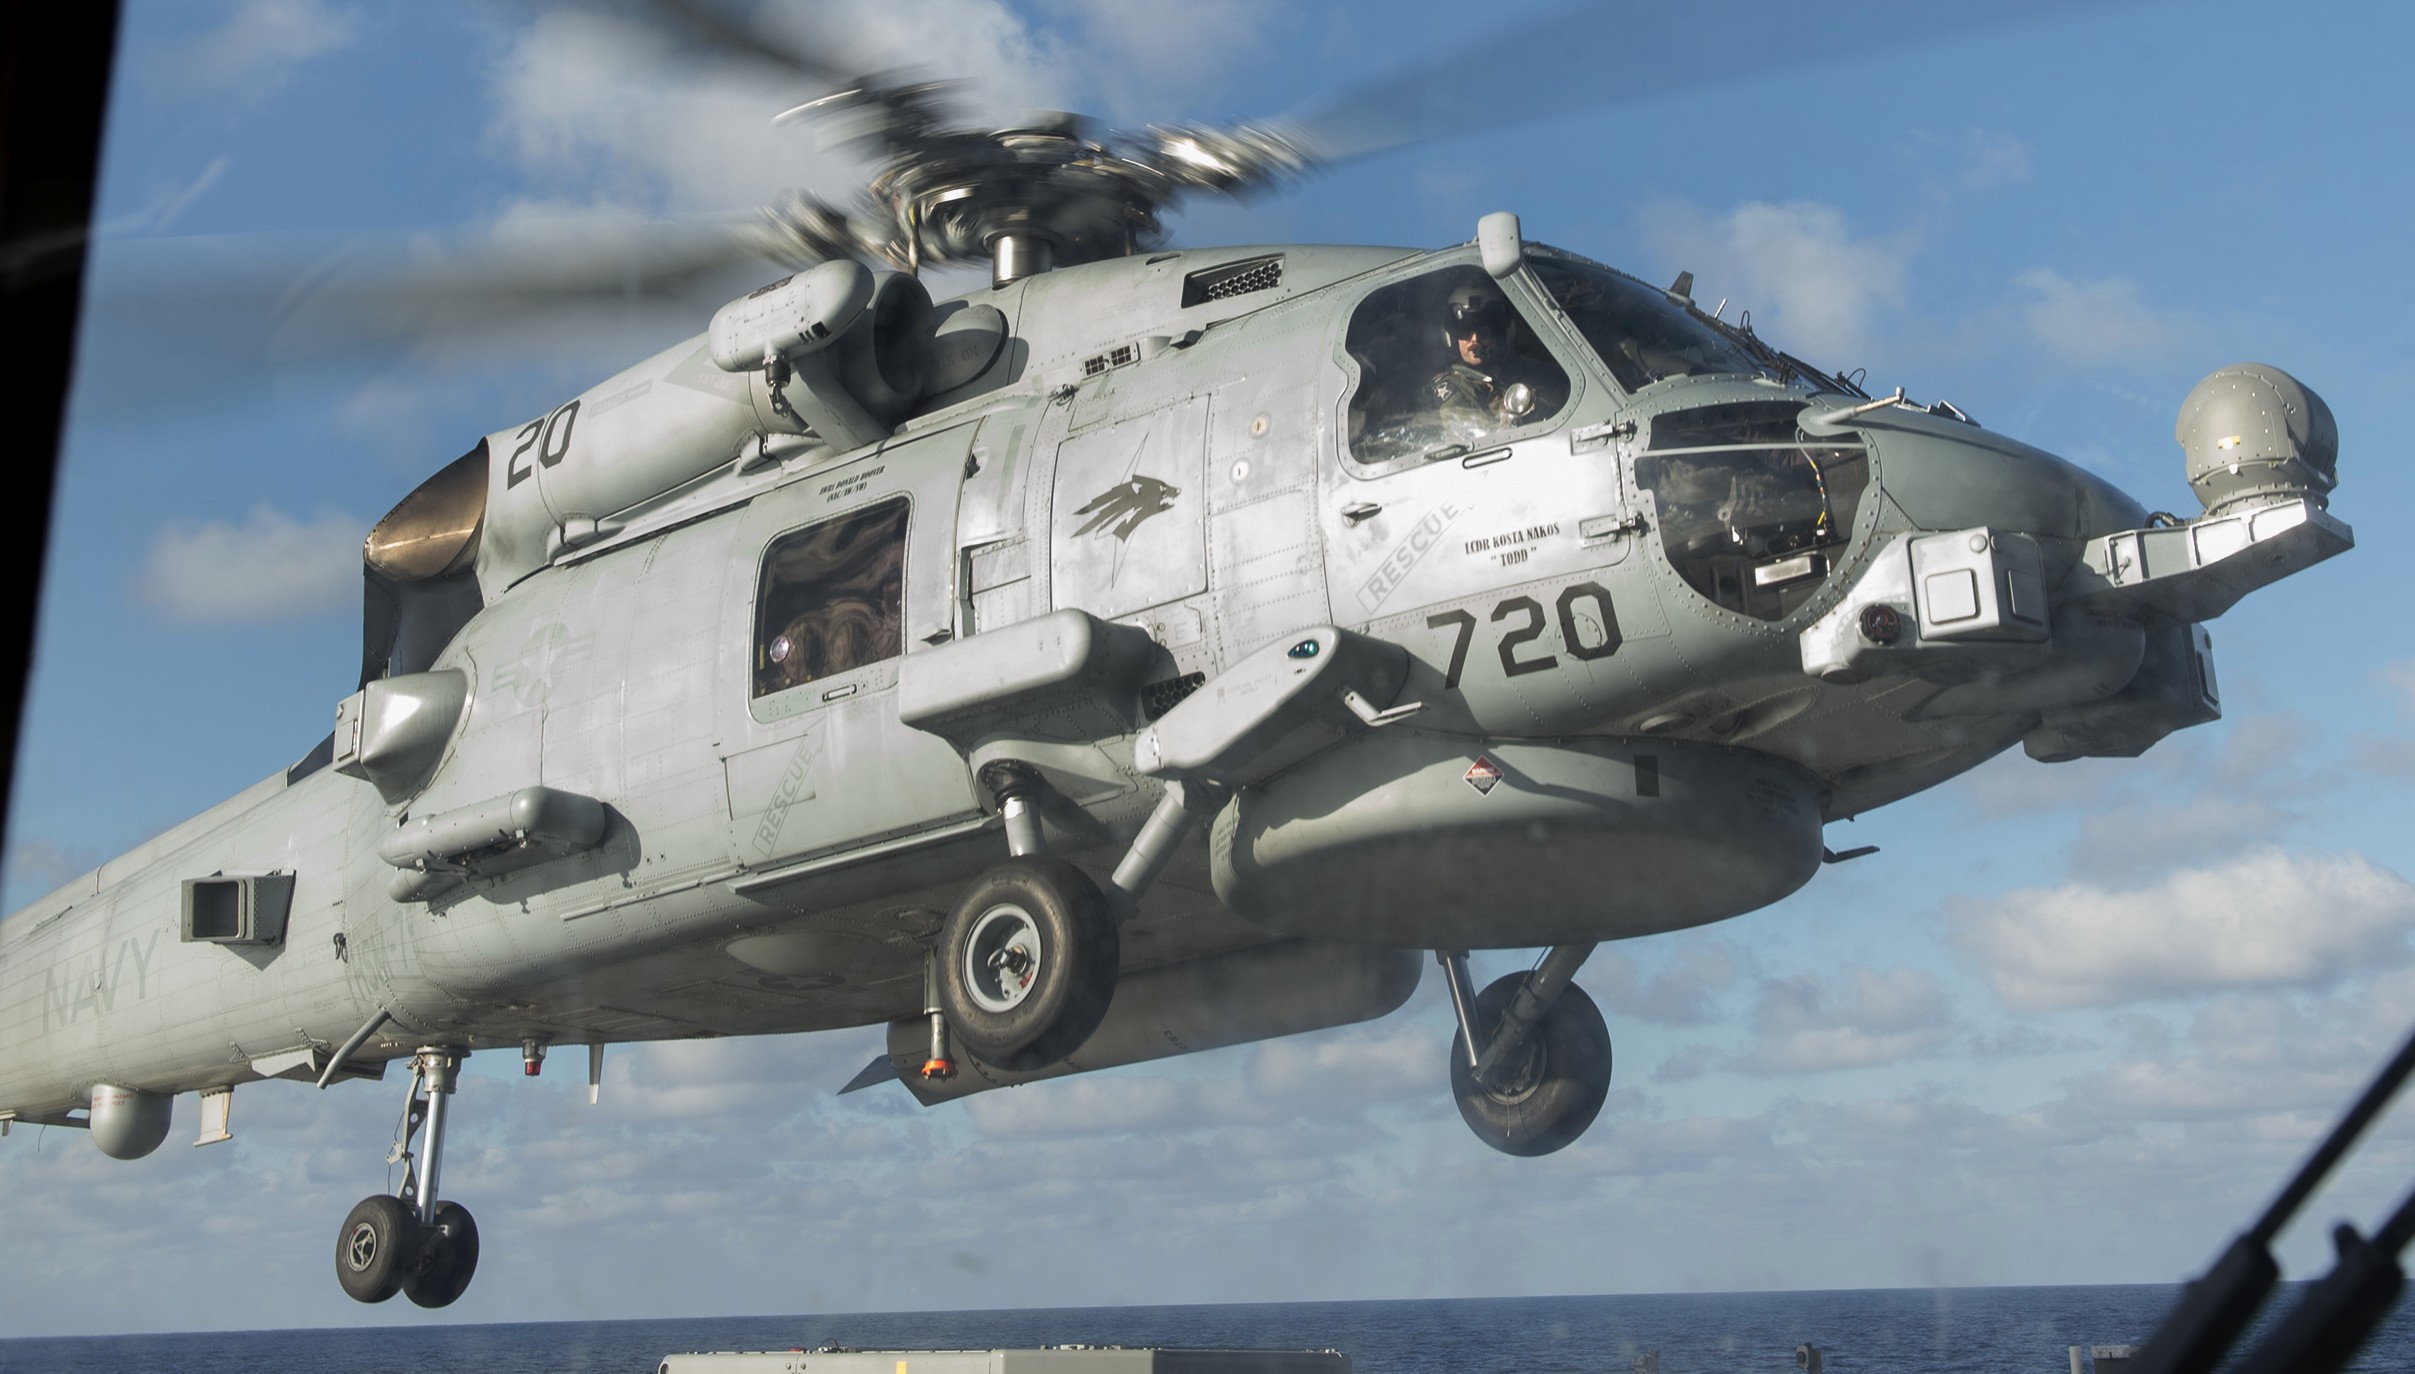 hsm-75 wolfpack helicopter maritime strike squadron us navy mh-60r seahawk 2015 49 uss chancellorsville cg-62